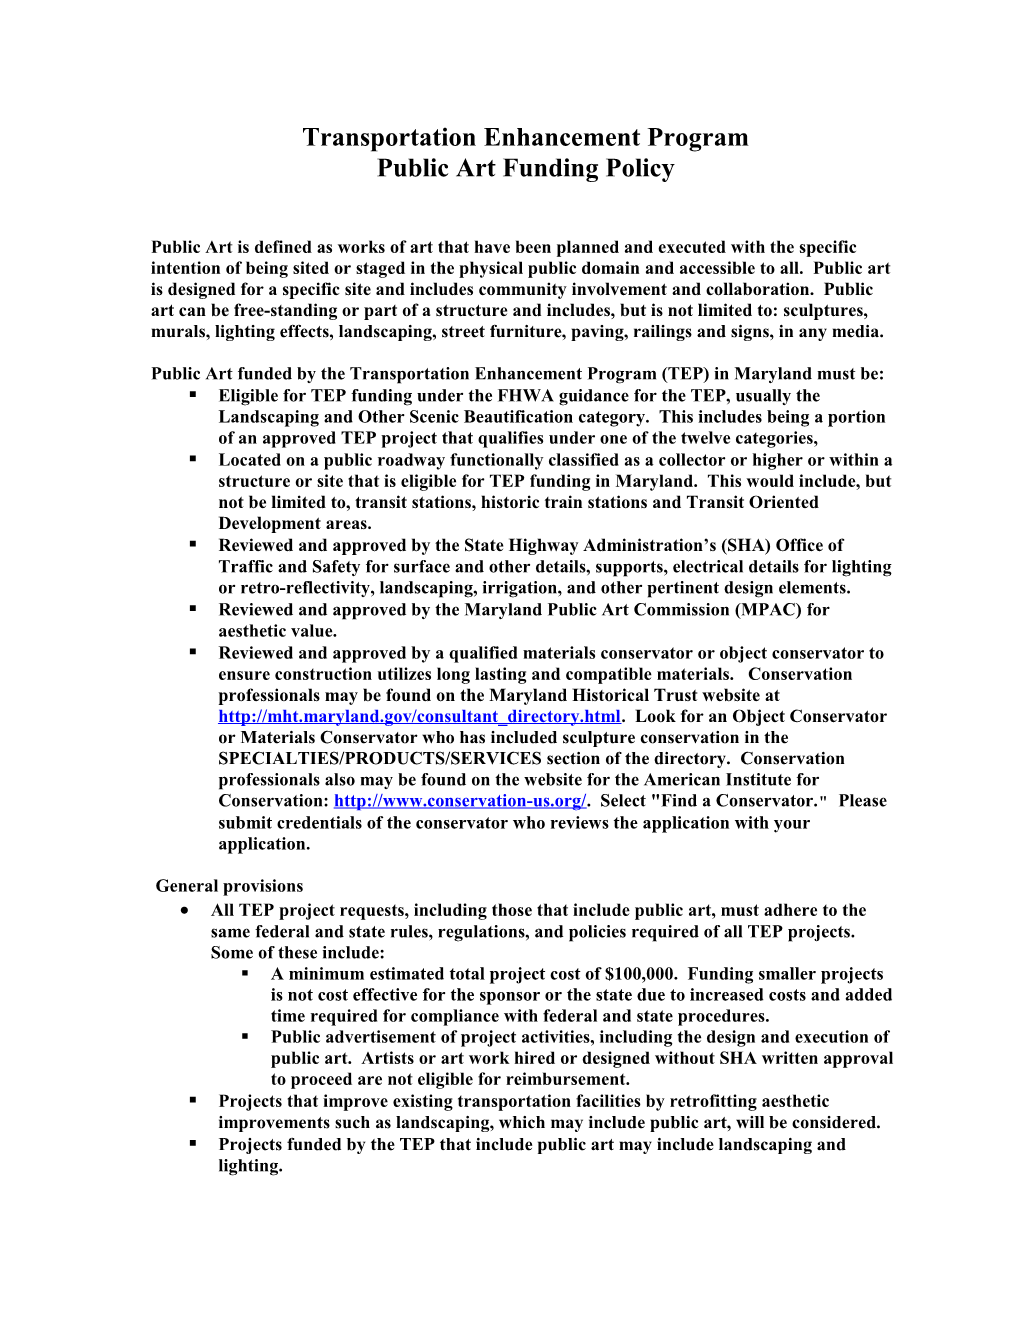 Public Art Funding Policy